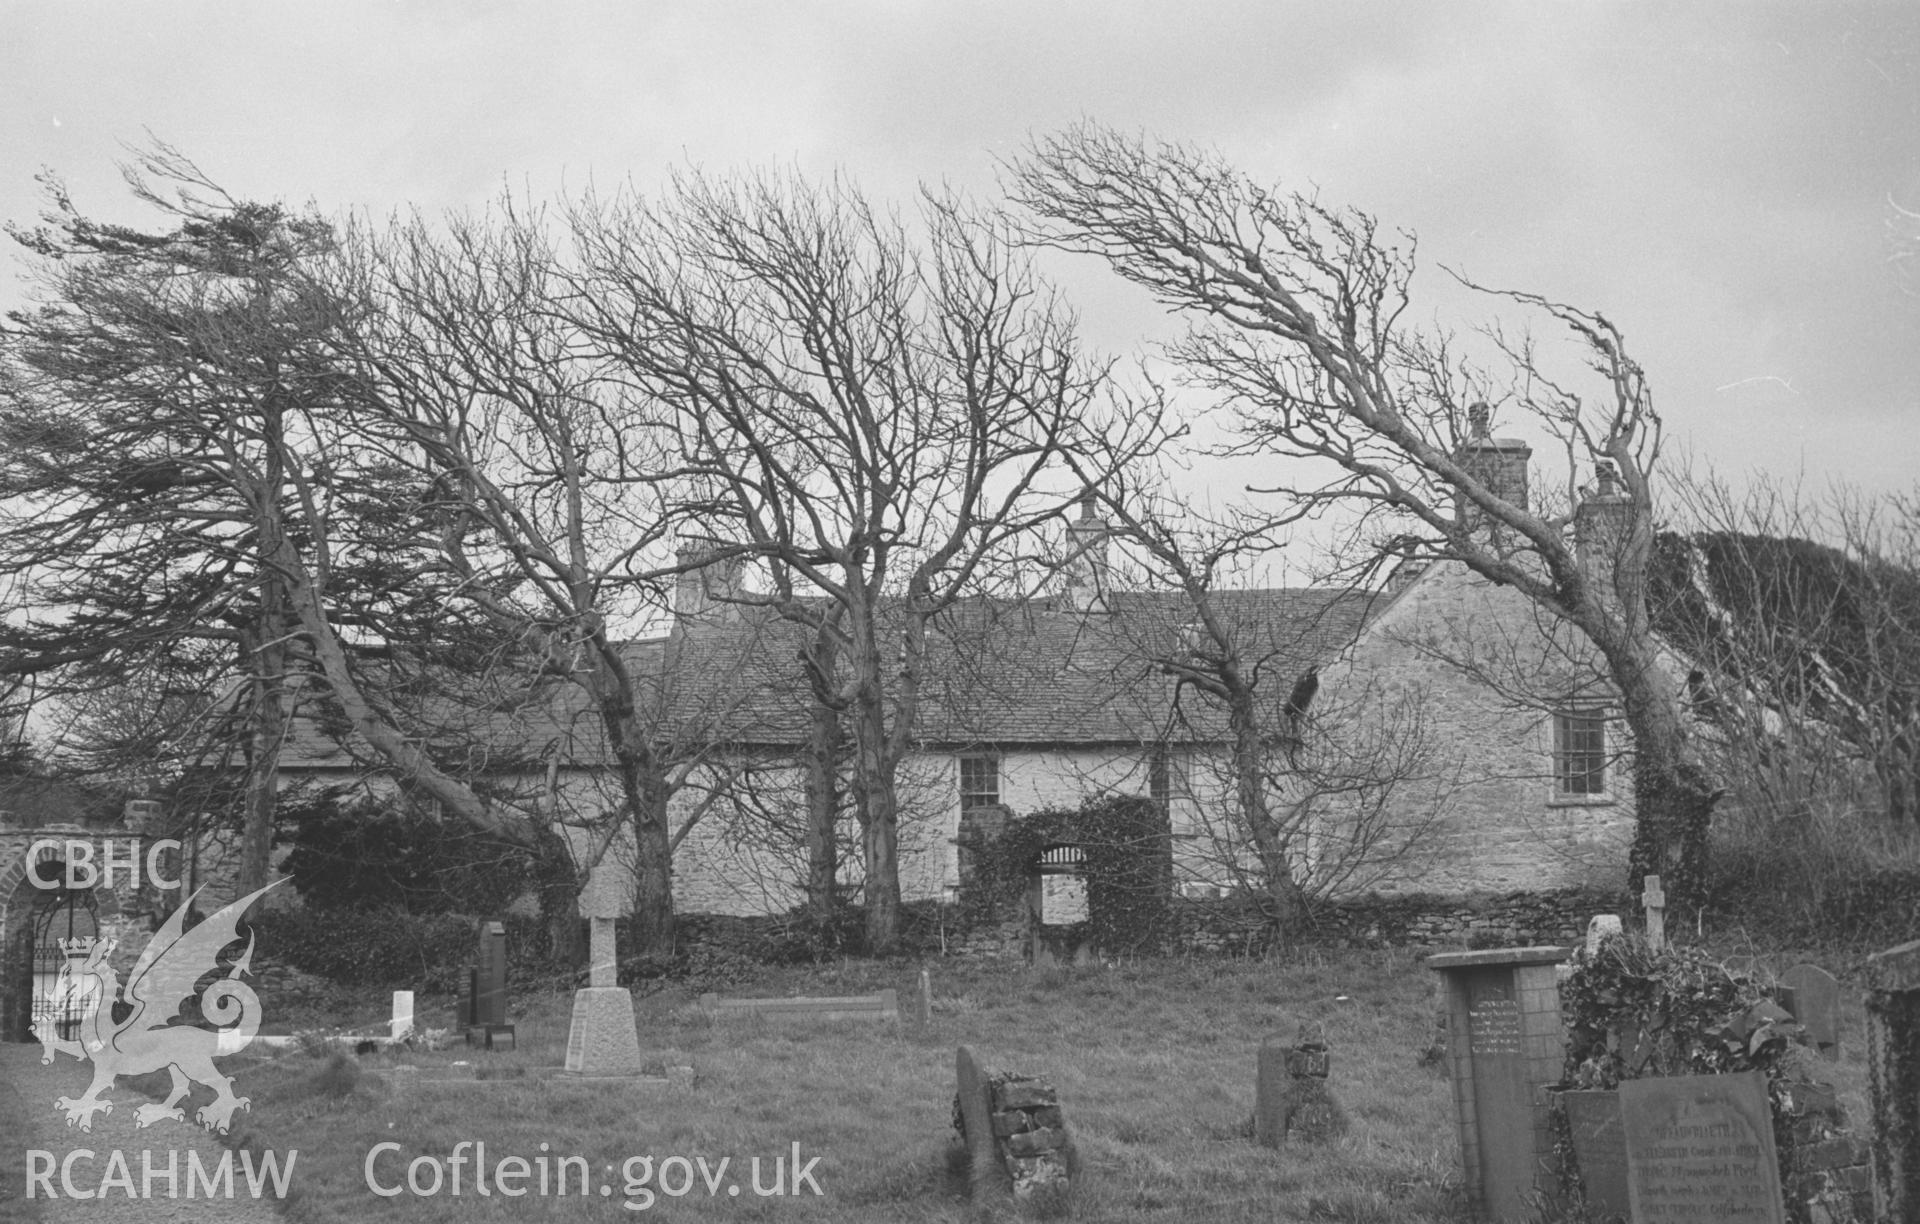 Digital copy of a black and white negative showing view from the churchyard at St. Ina's to Llanina House, Llanina, near New Quay. Photographed by Arthur O. Chater in April 1966 from Grid Reference SN 405 598, looking south west.